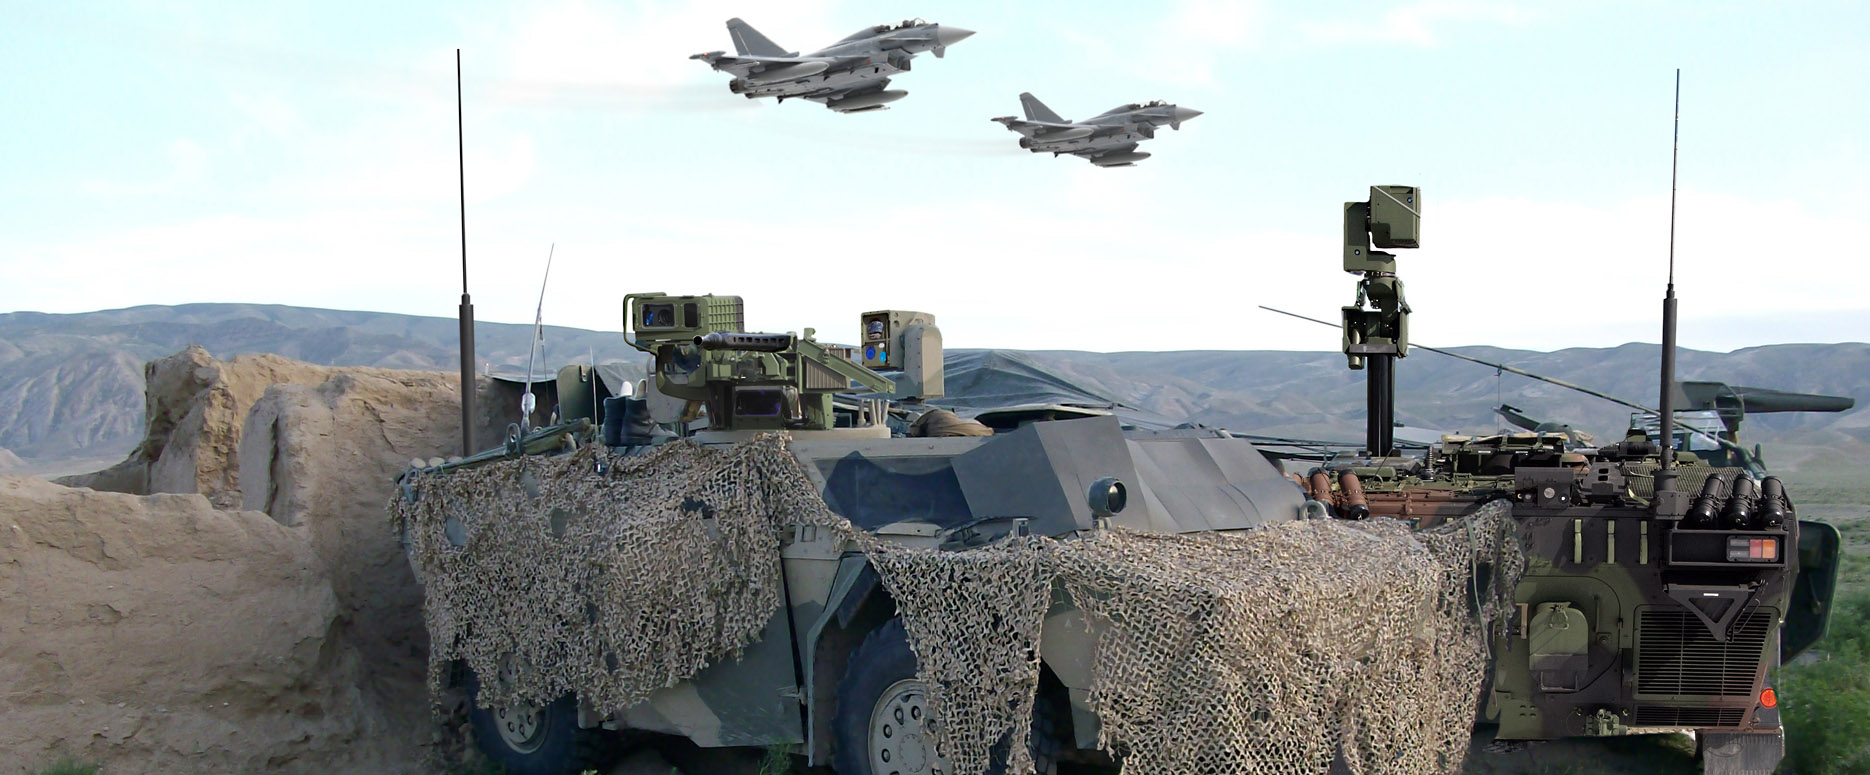 Two Eurofighter Typhoon aircraft flying over two camouflaged FENNEK reconnaissance vehicles